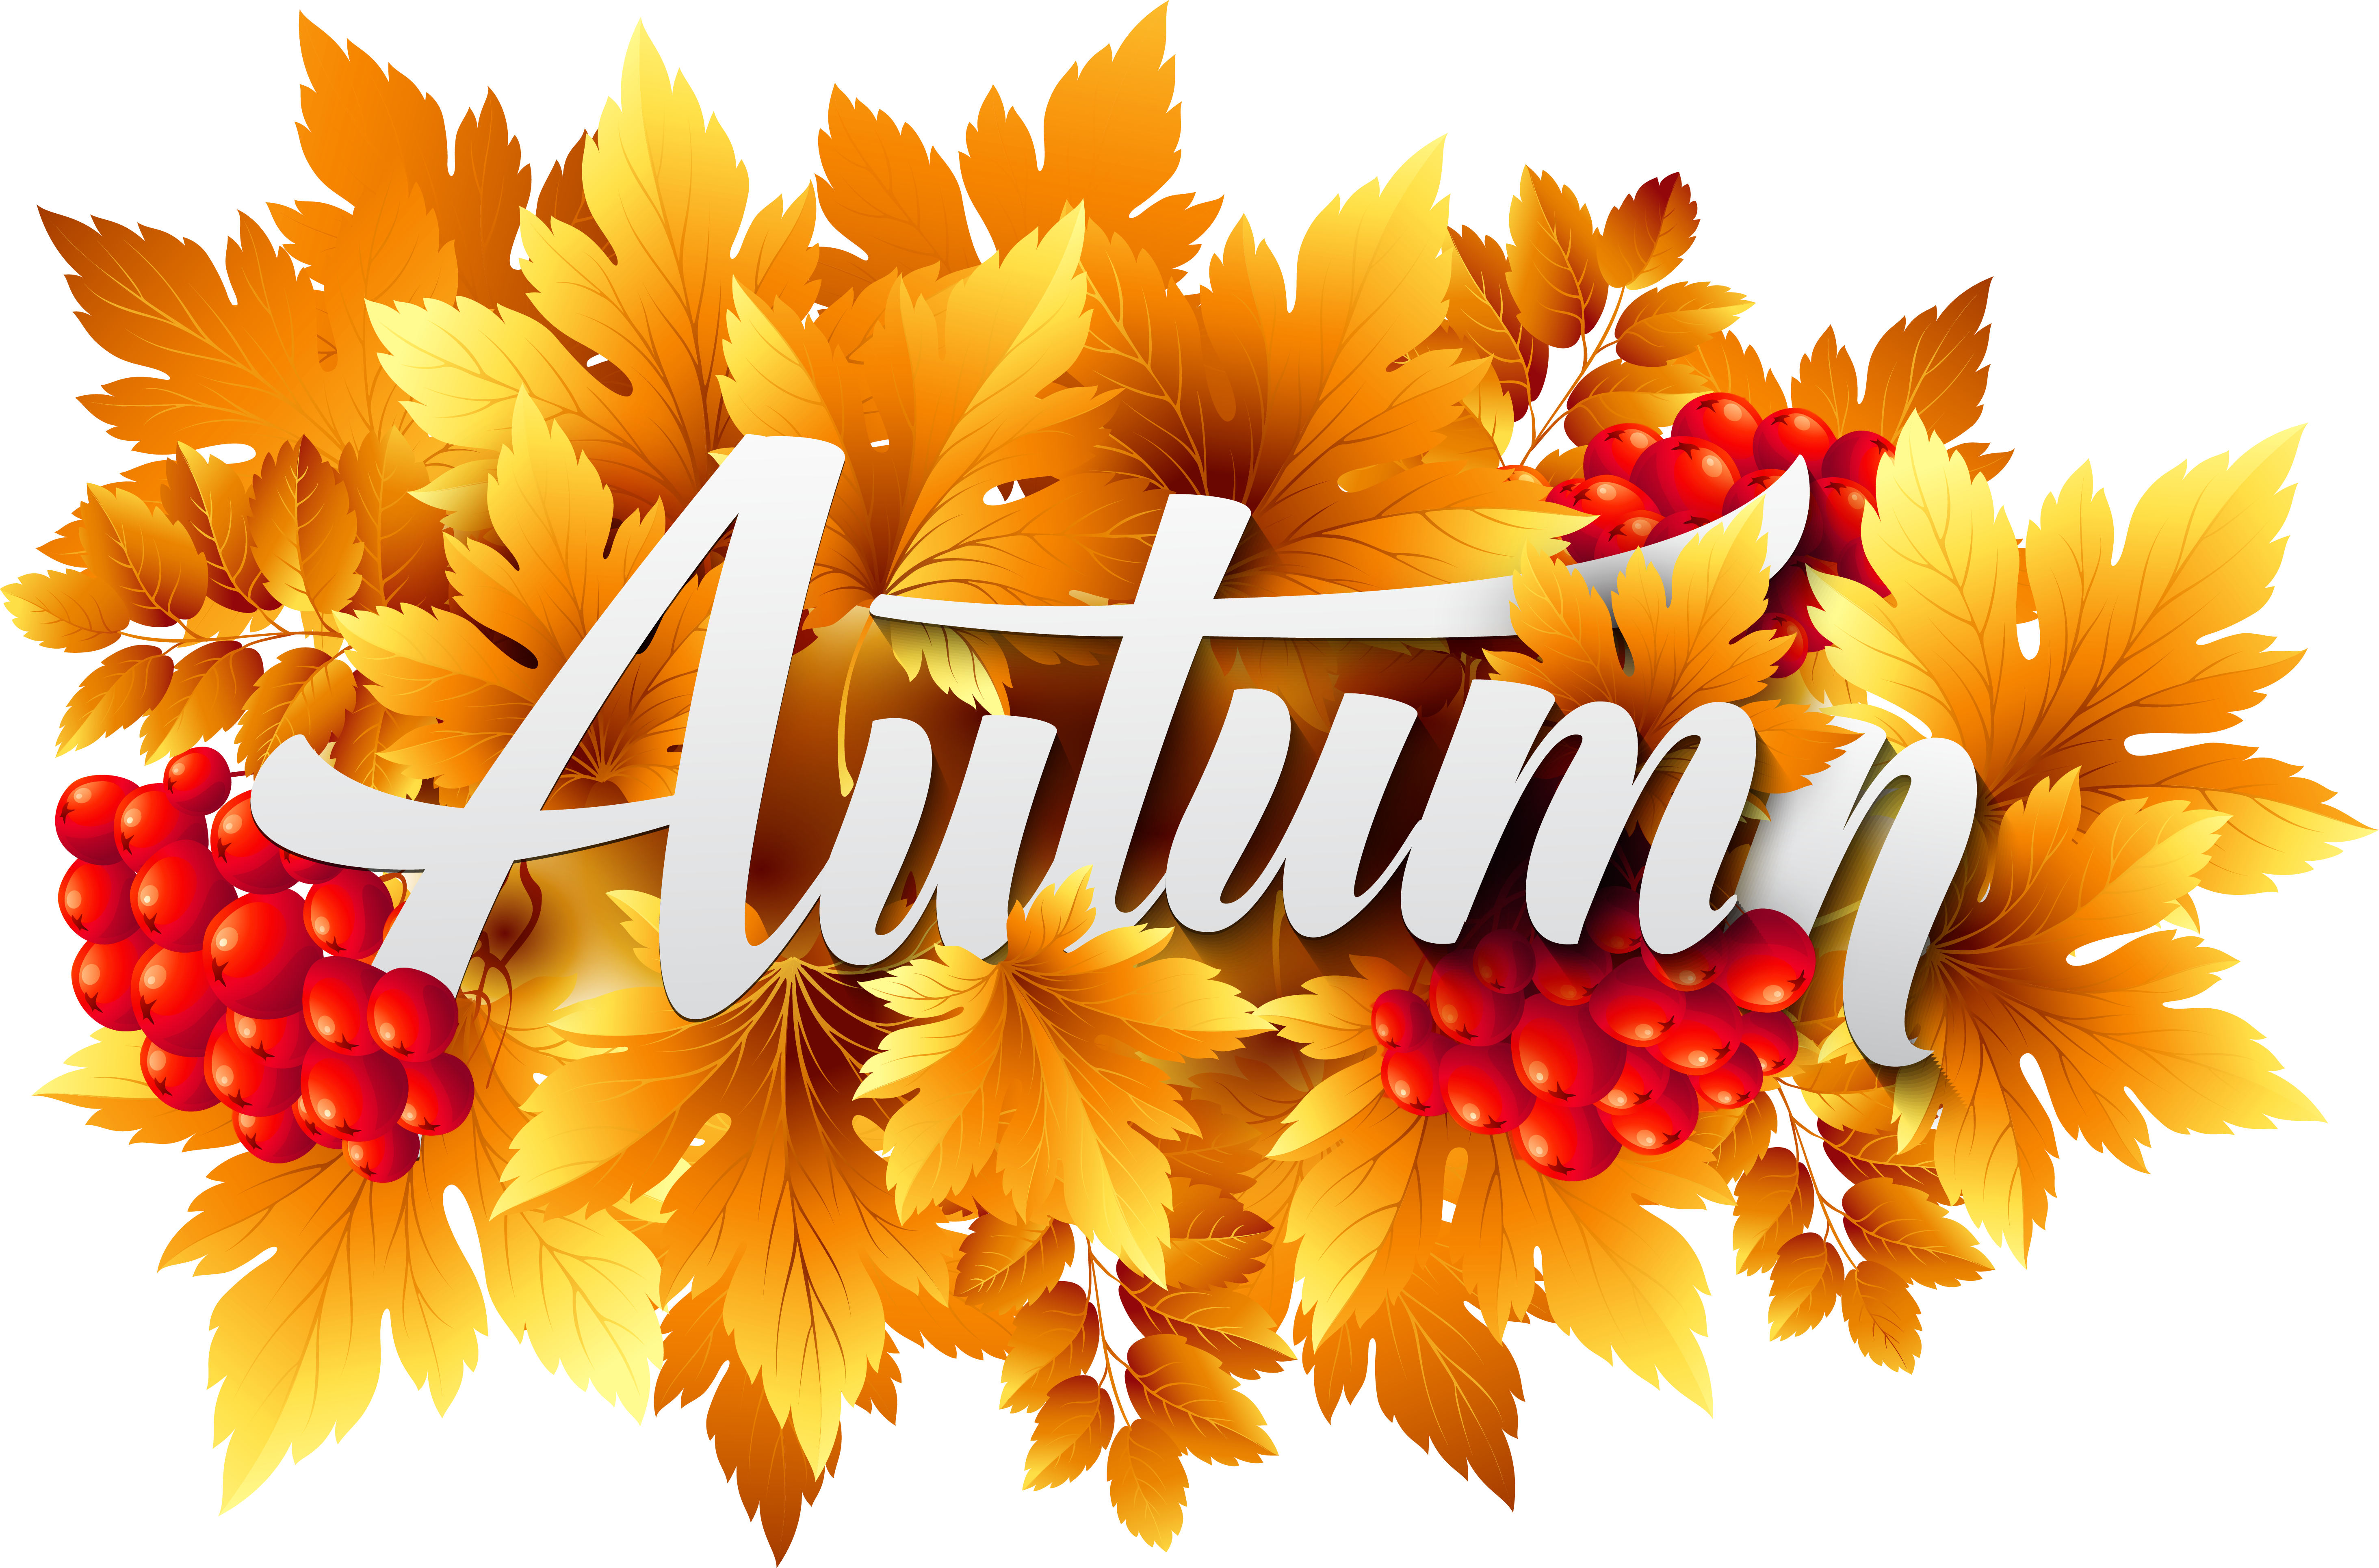 Autumn Decorative Image PNG Clipart | Gallery Yopriceville ...